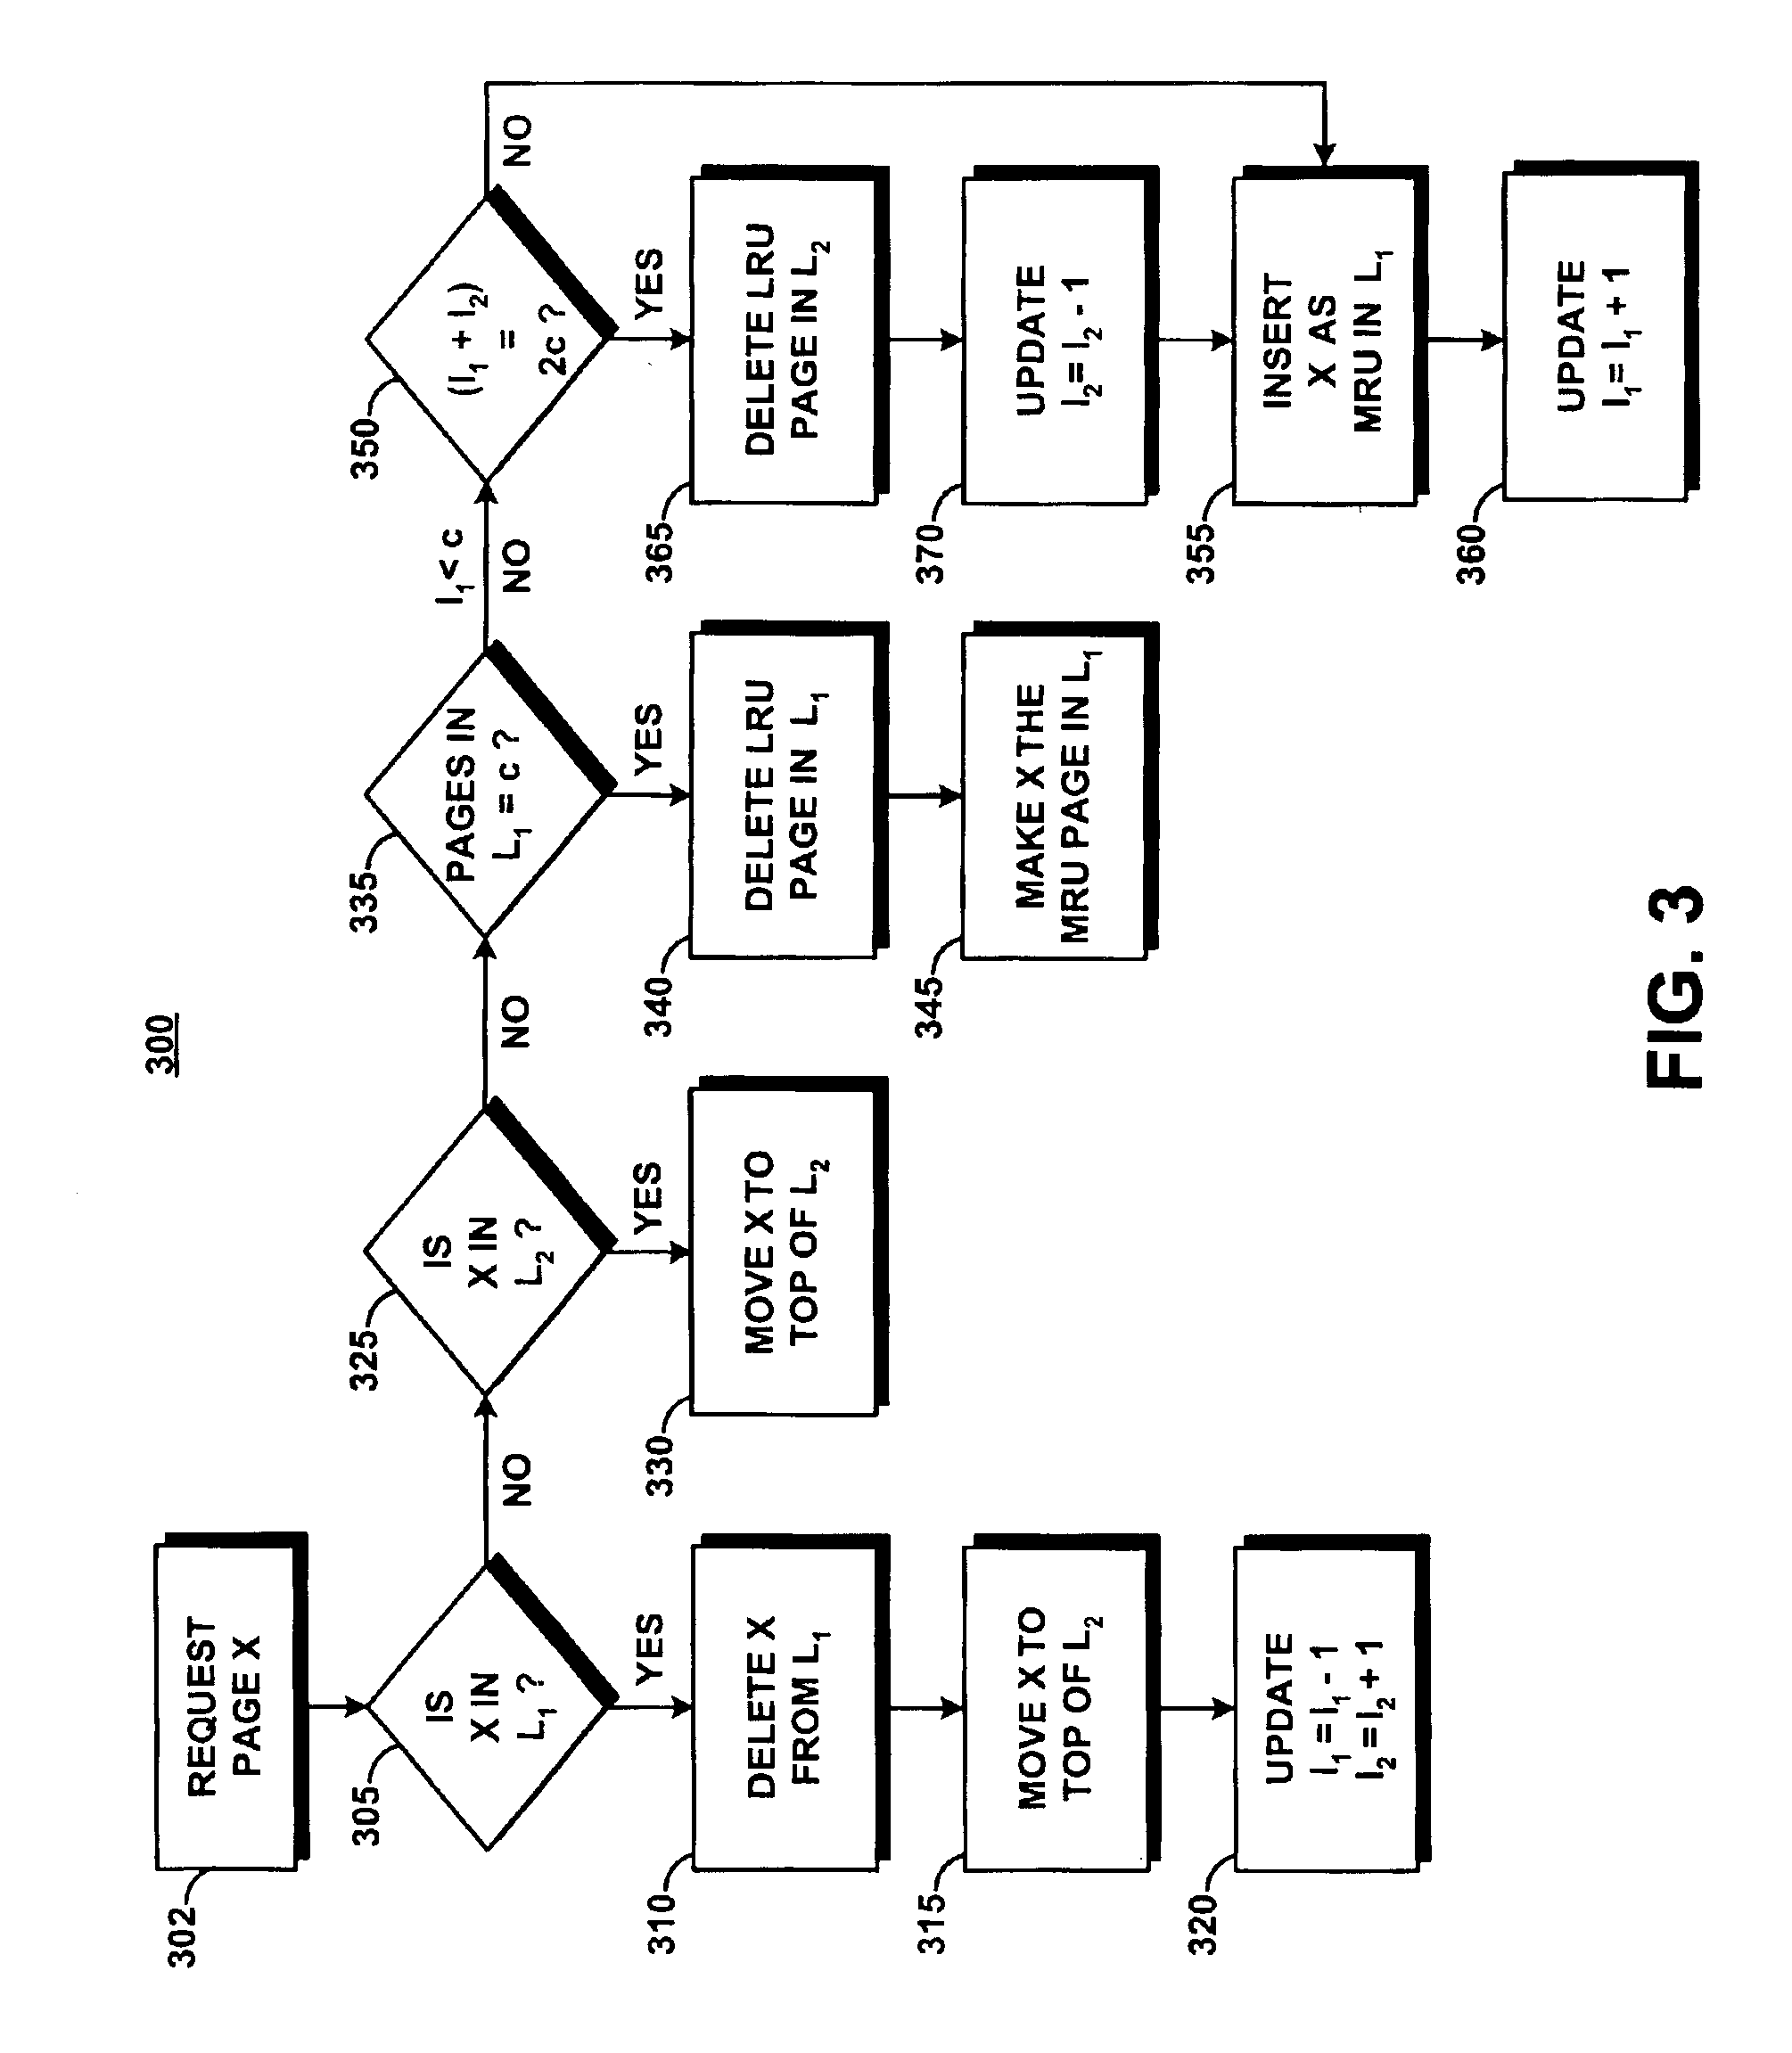 System and method for implementing an adaptive replacement cache policy